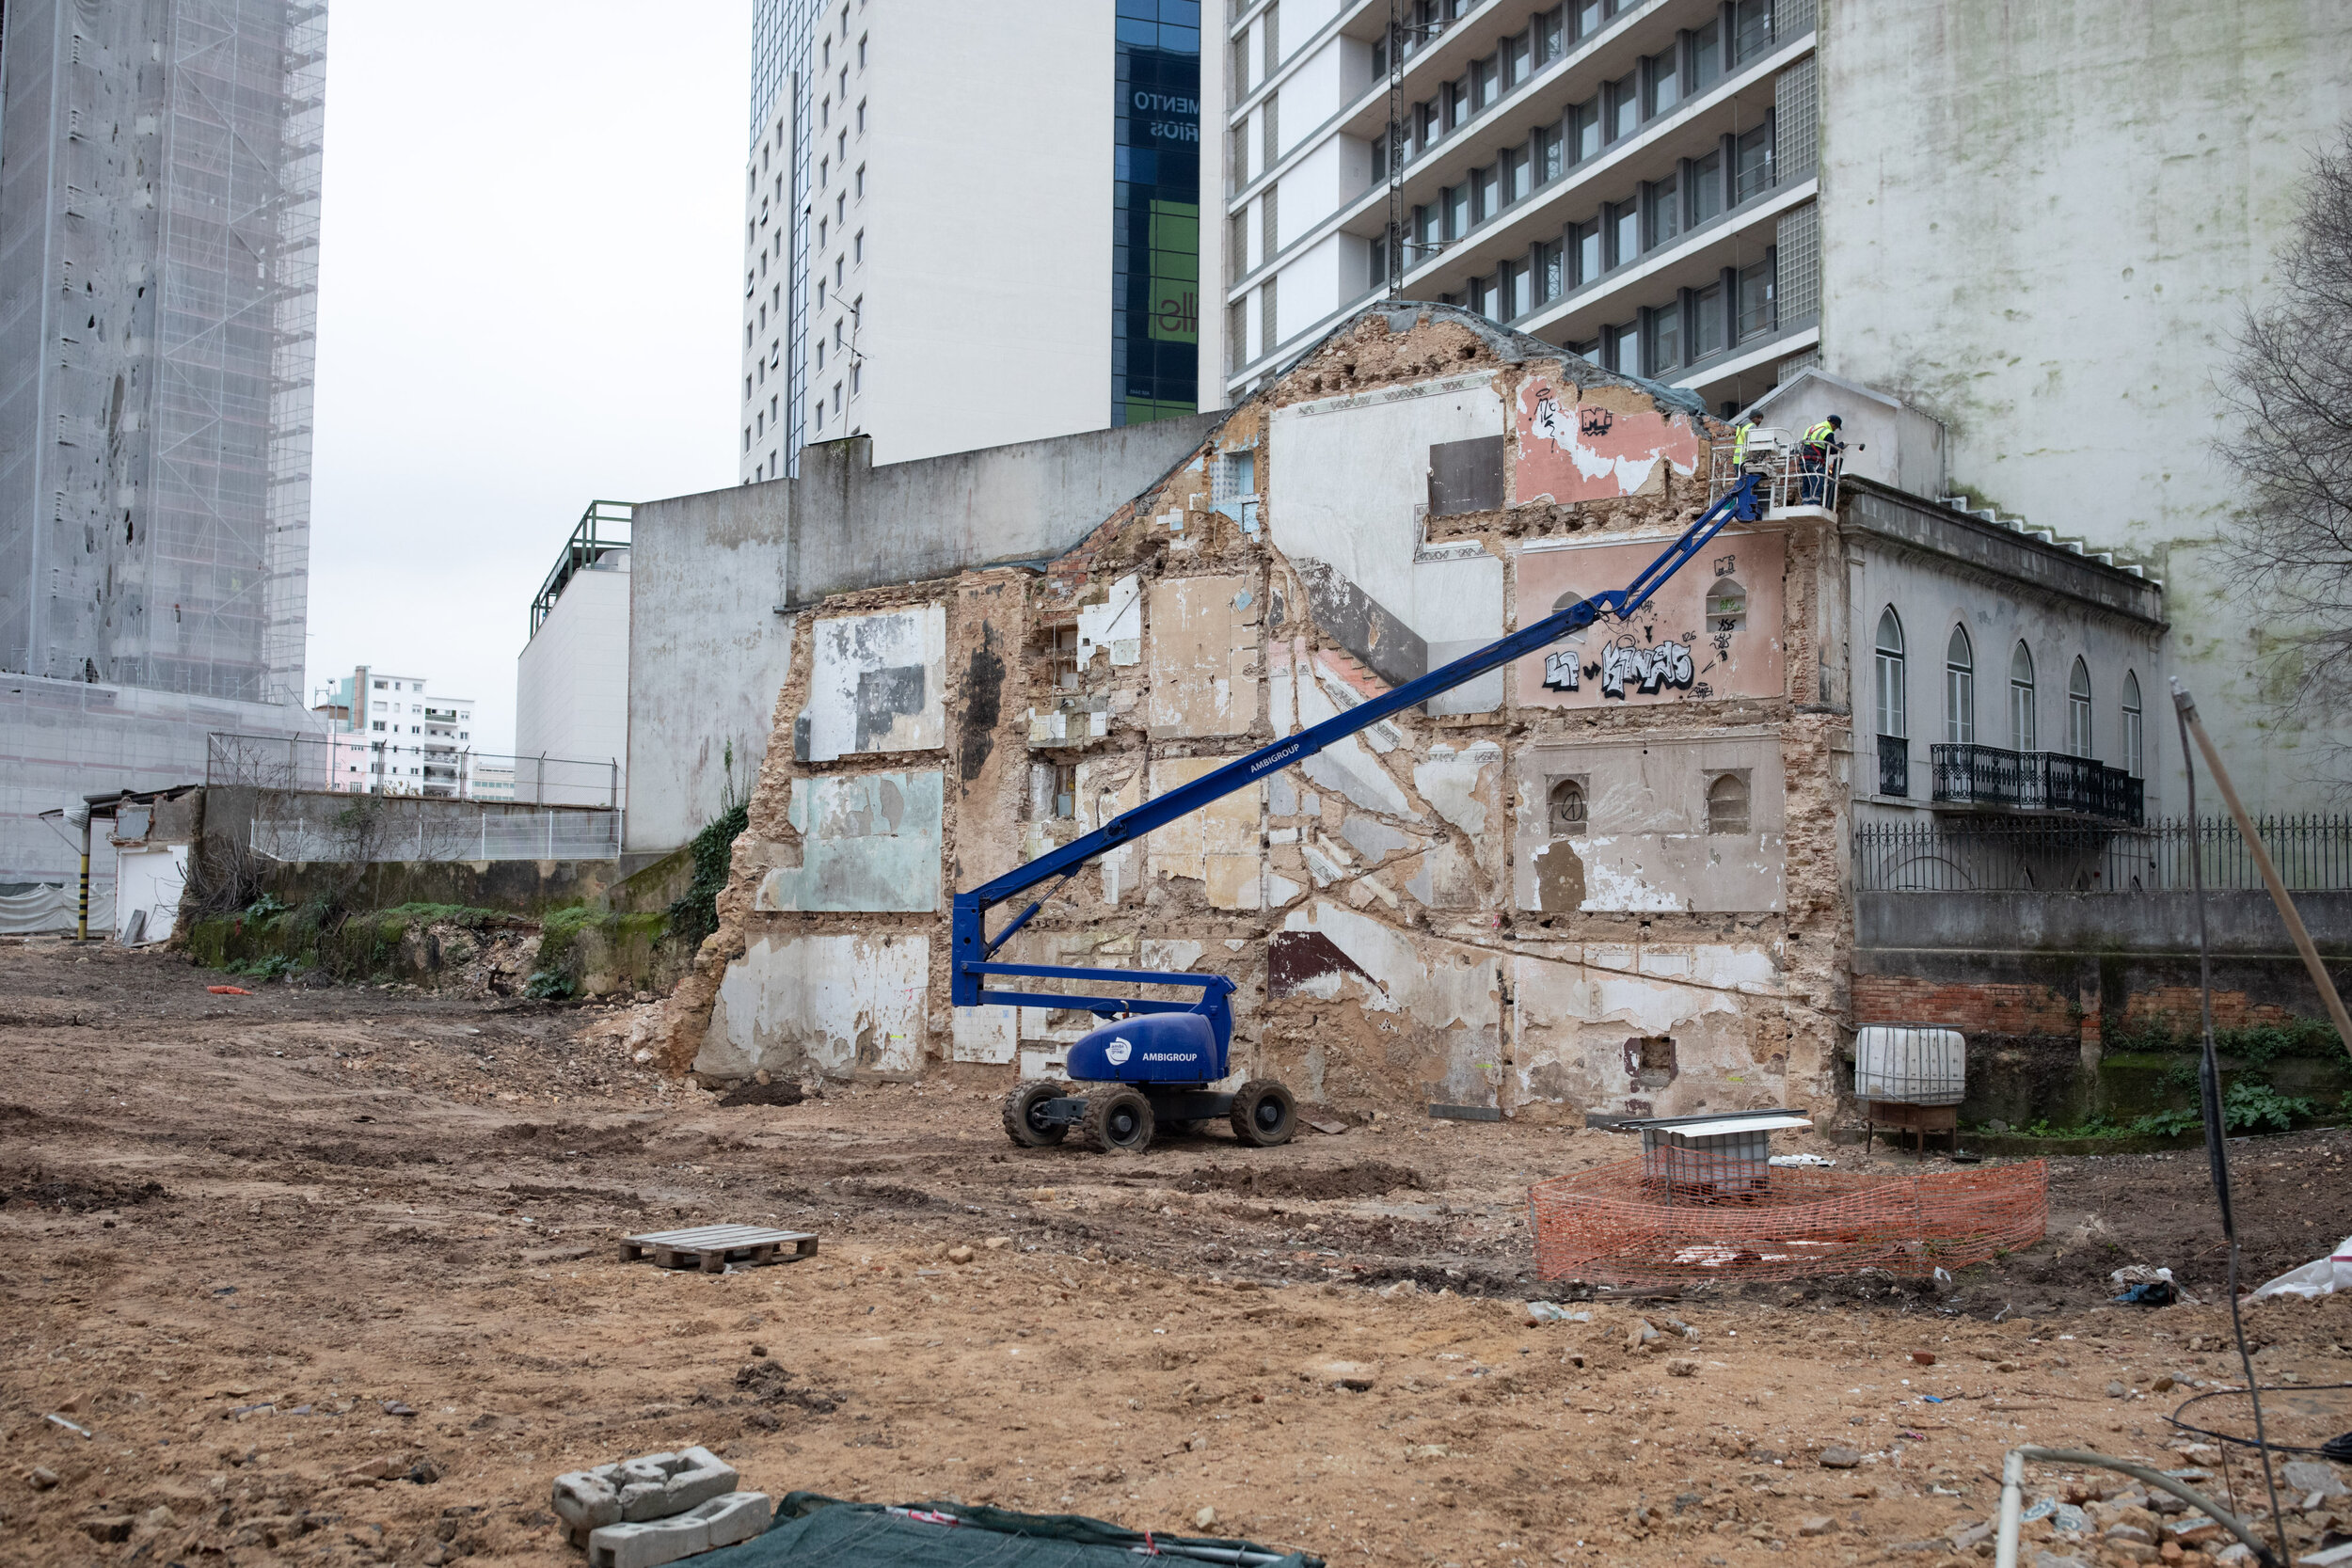  9th of January 2020   Workers for LX Living, a multi-million euro luxury real-estate project by South African investors, finish demolishing a former low income neighbourhood in Campolide, Lisbon.    